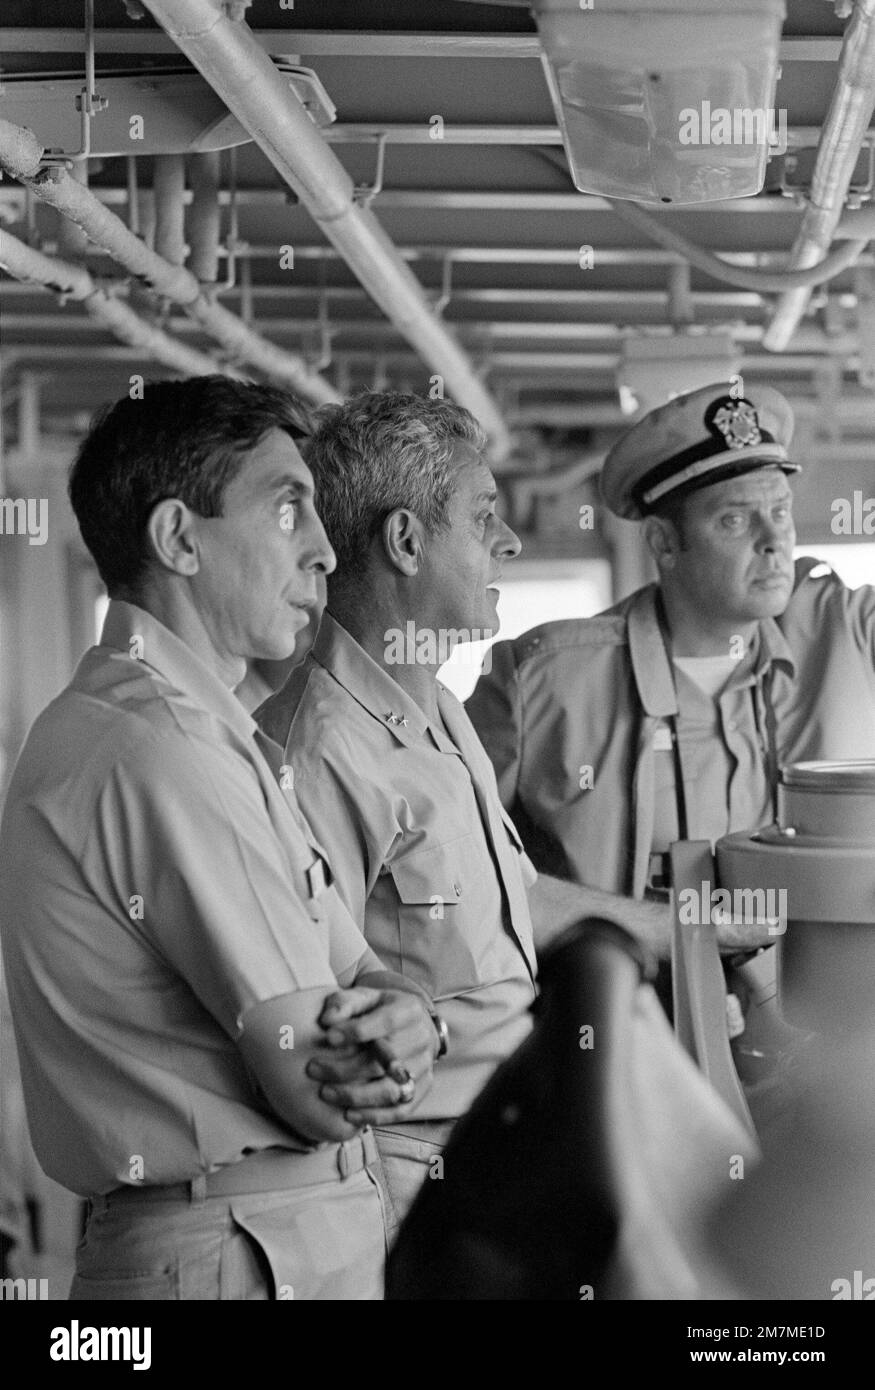 Rear Admiral Frederick F. Palmer, Commander, Amphibious Group Two, center, talks to crewmen on the bridge of the amphibious command ship USS MOUNT WHITNEY (LCC 20) while en route to participate in allied Exercise TEAM WORK '76. The MOUNT WHITNEY is serving as flagship during the exercise is scheduled for September 15-24. Subject Operation/Series: TEAM WORK '76 Country: Unknown Stock Photo